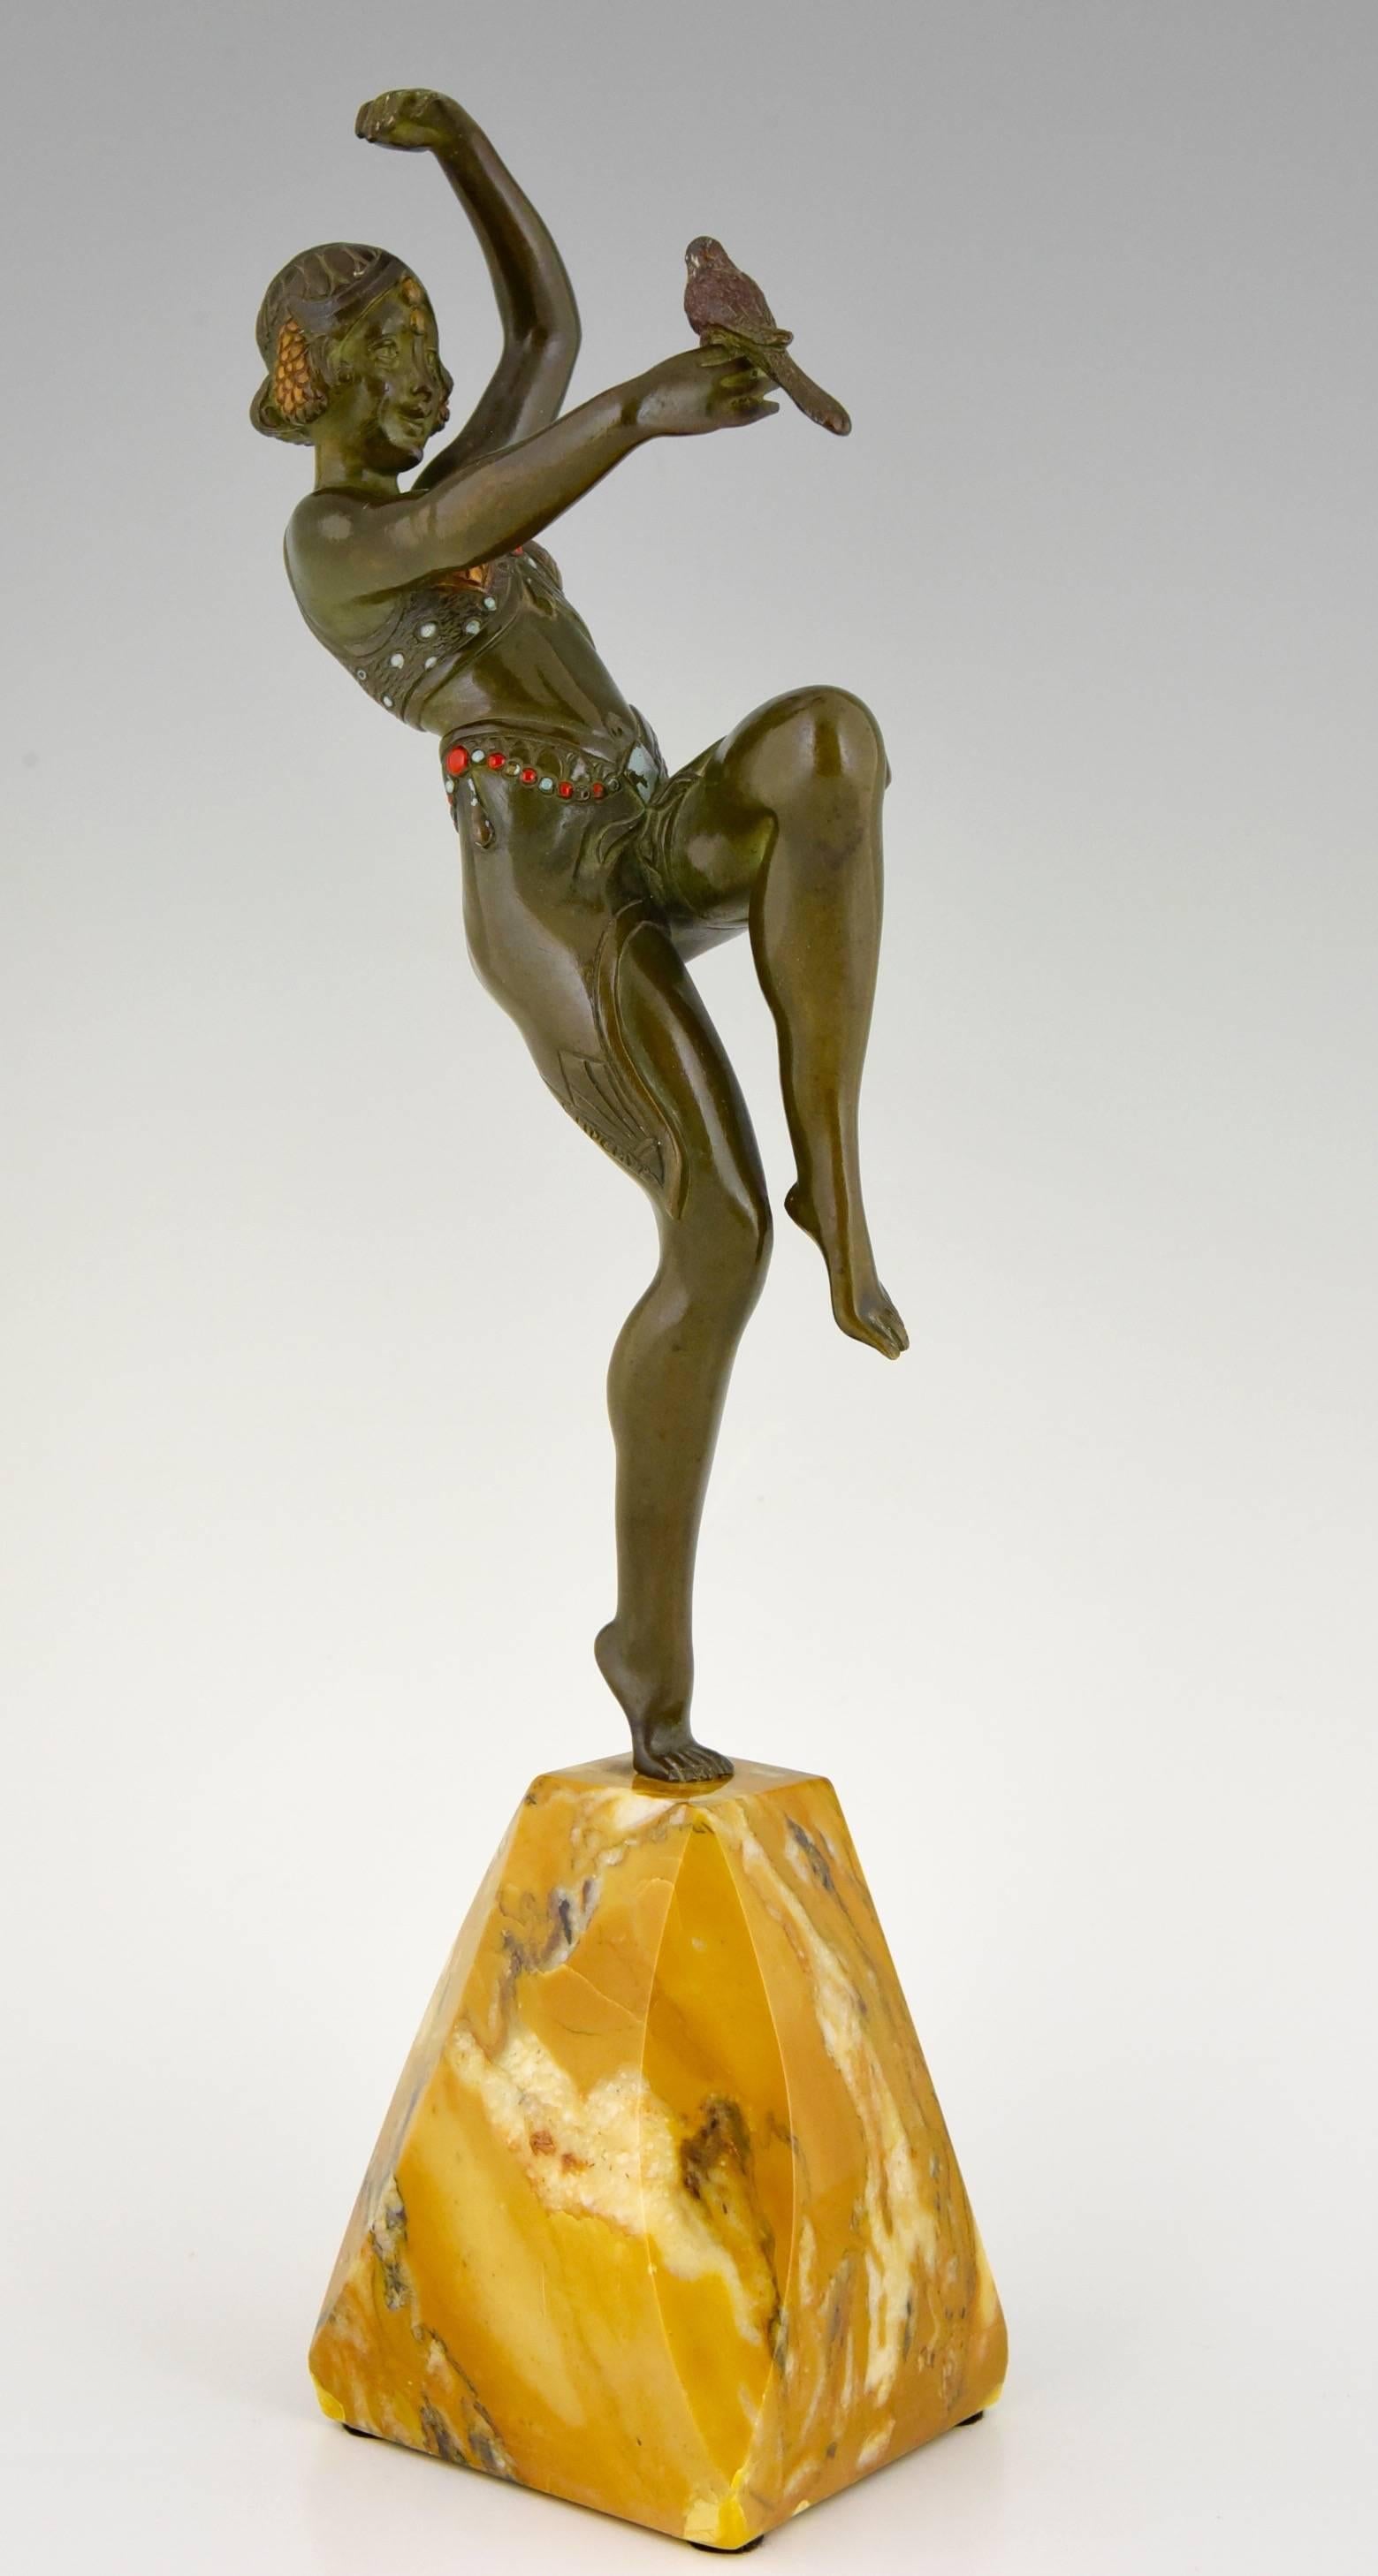 Art Deco bronze sculpture of a dancing girl holding a bird.
Green patinated bronze with enameled ornaments. 
Signed by the artist Samuel Lipchytz, (1880-1943)

Literature:
Art deco sculpture by Victor Arwas, Academy. 
Bronzes, sculptors and